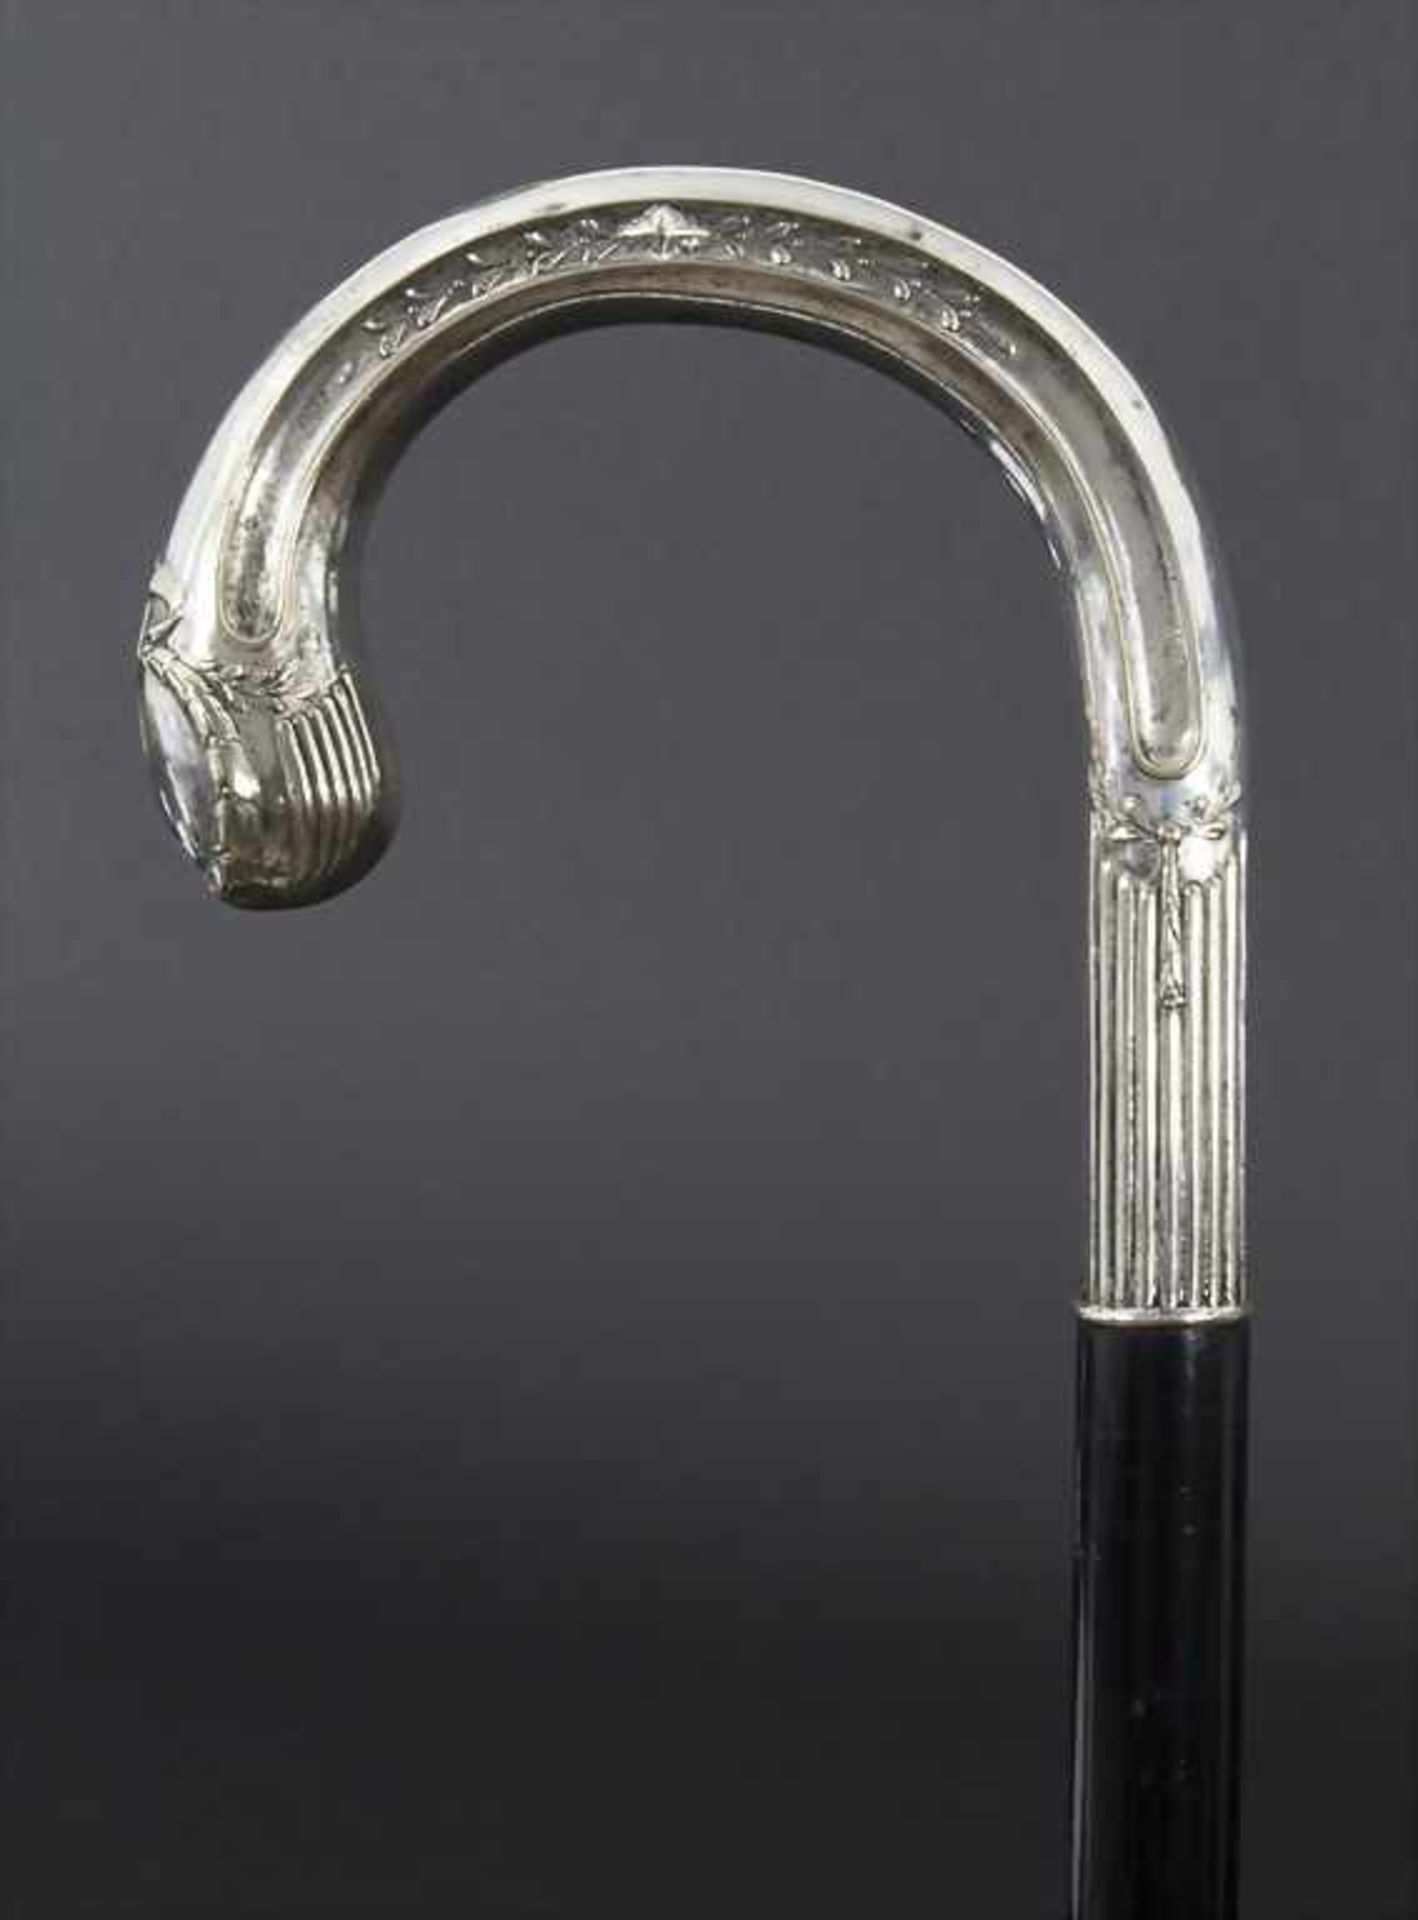 Gehstock mit Silbergriff / A cane with silver handle, um 1900Material: Messing, versilbert (